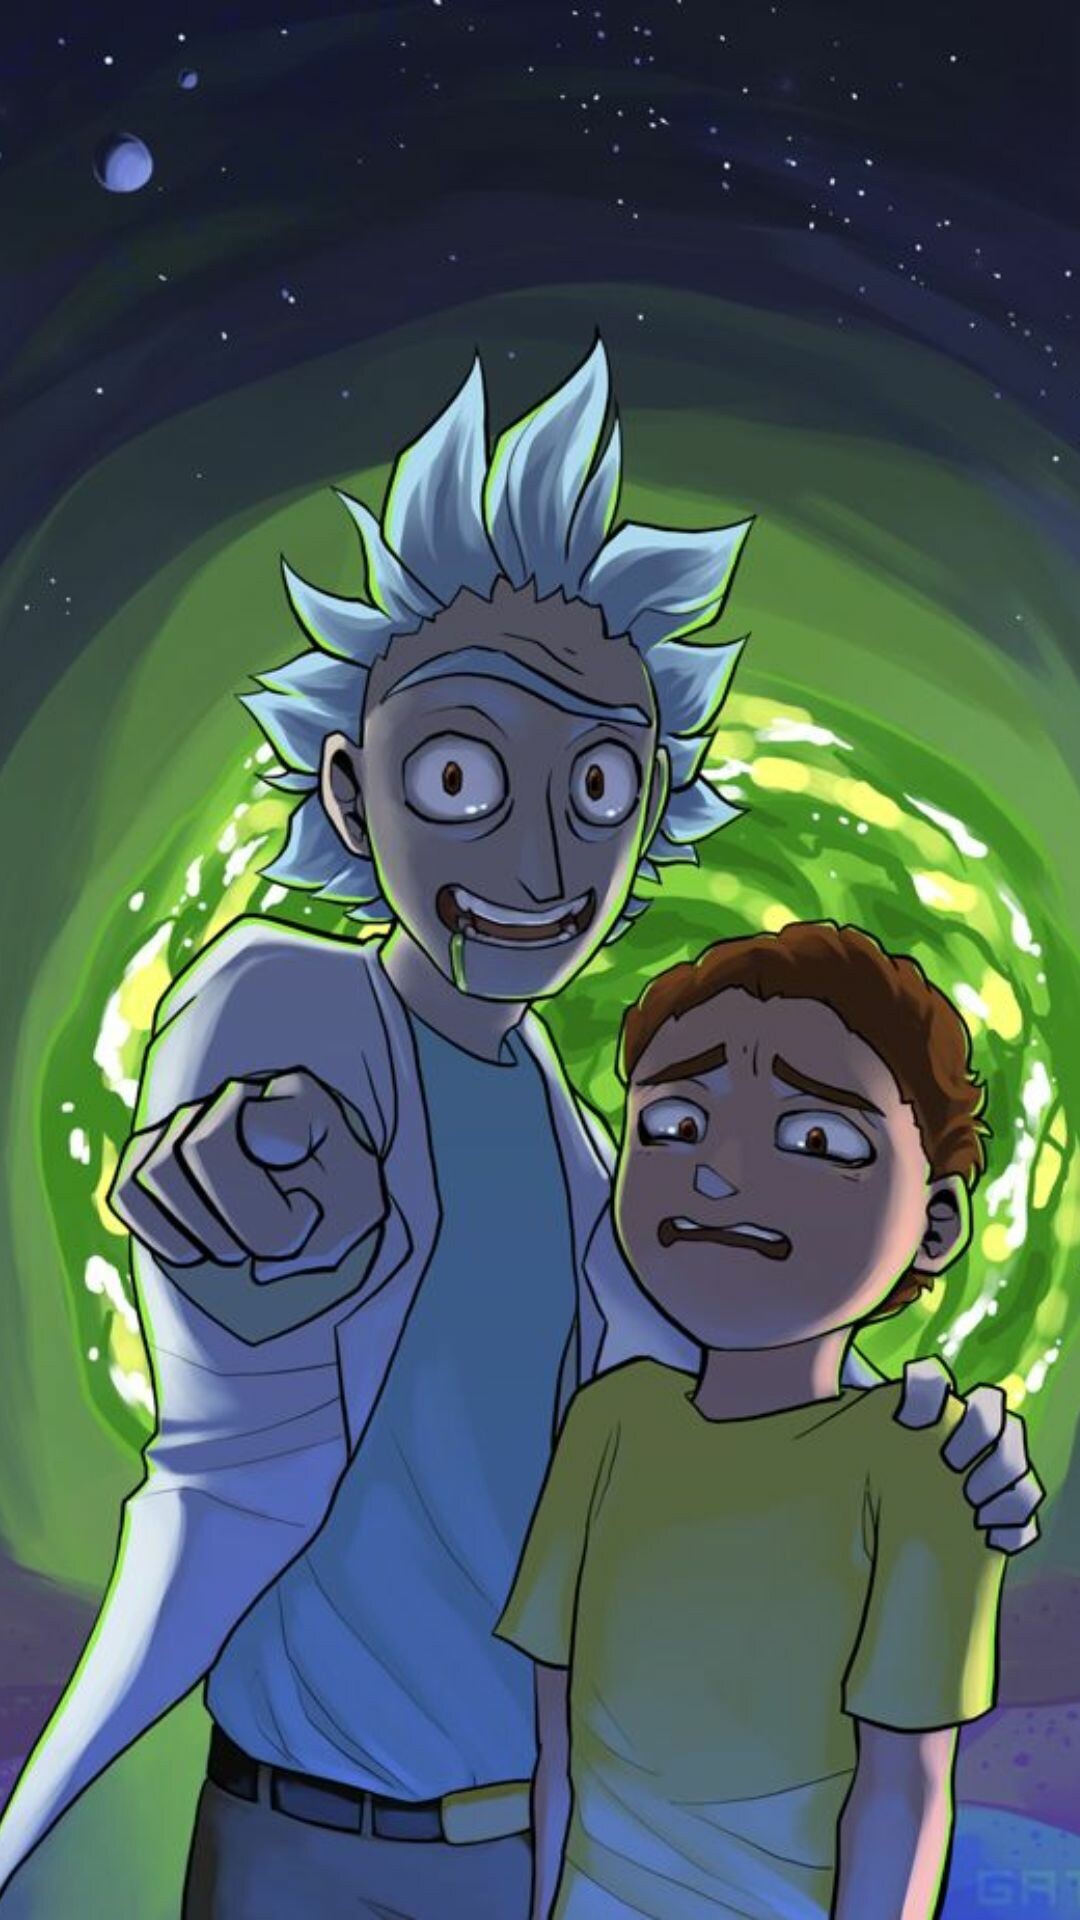 Rick and Morty: Justin Roiland voices the eponymous characters. 1080x1920 Full HD Wallpaper.